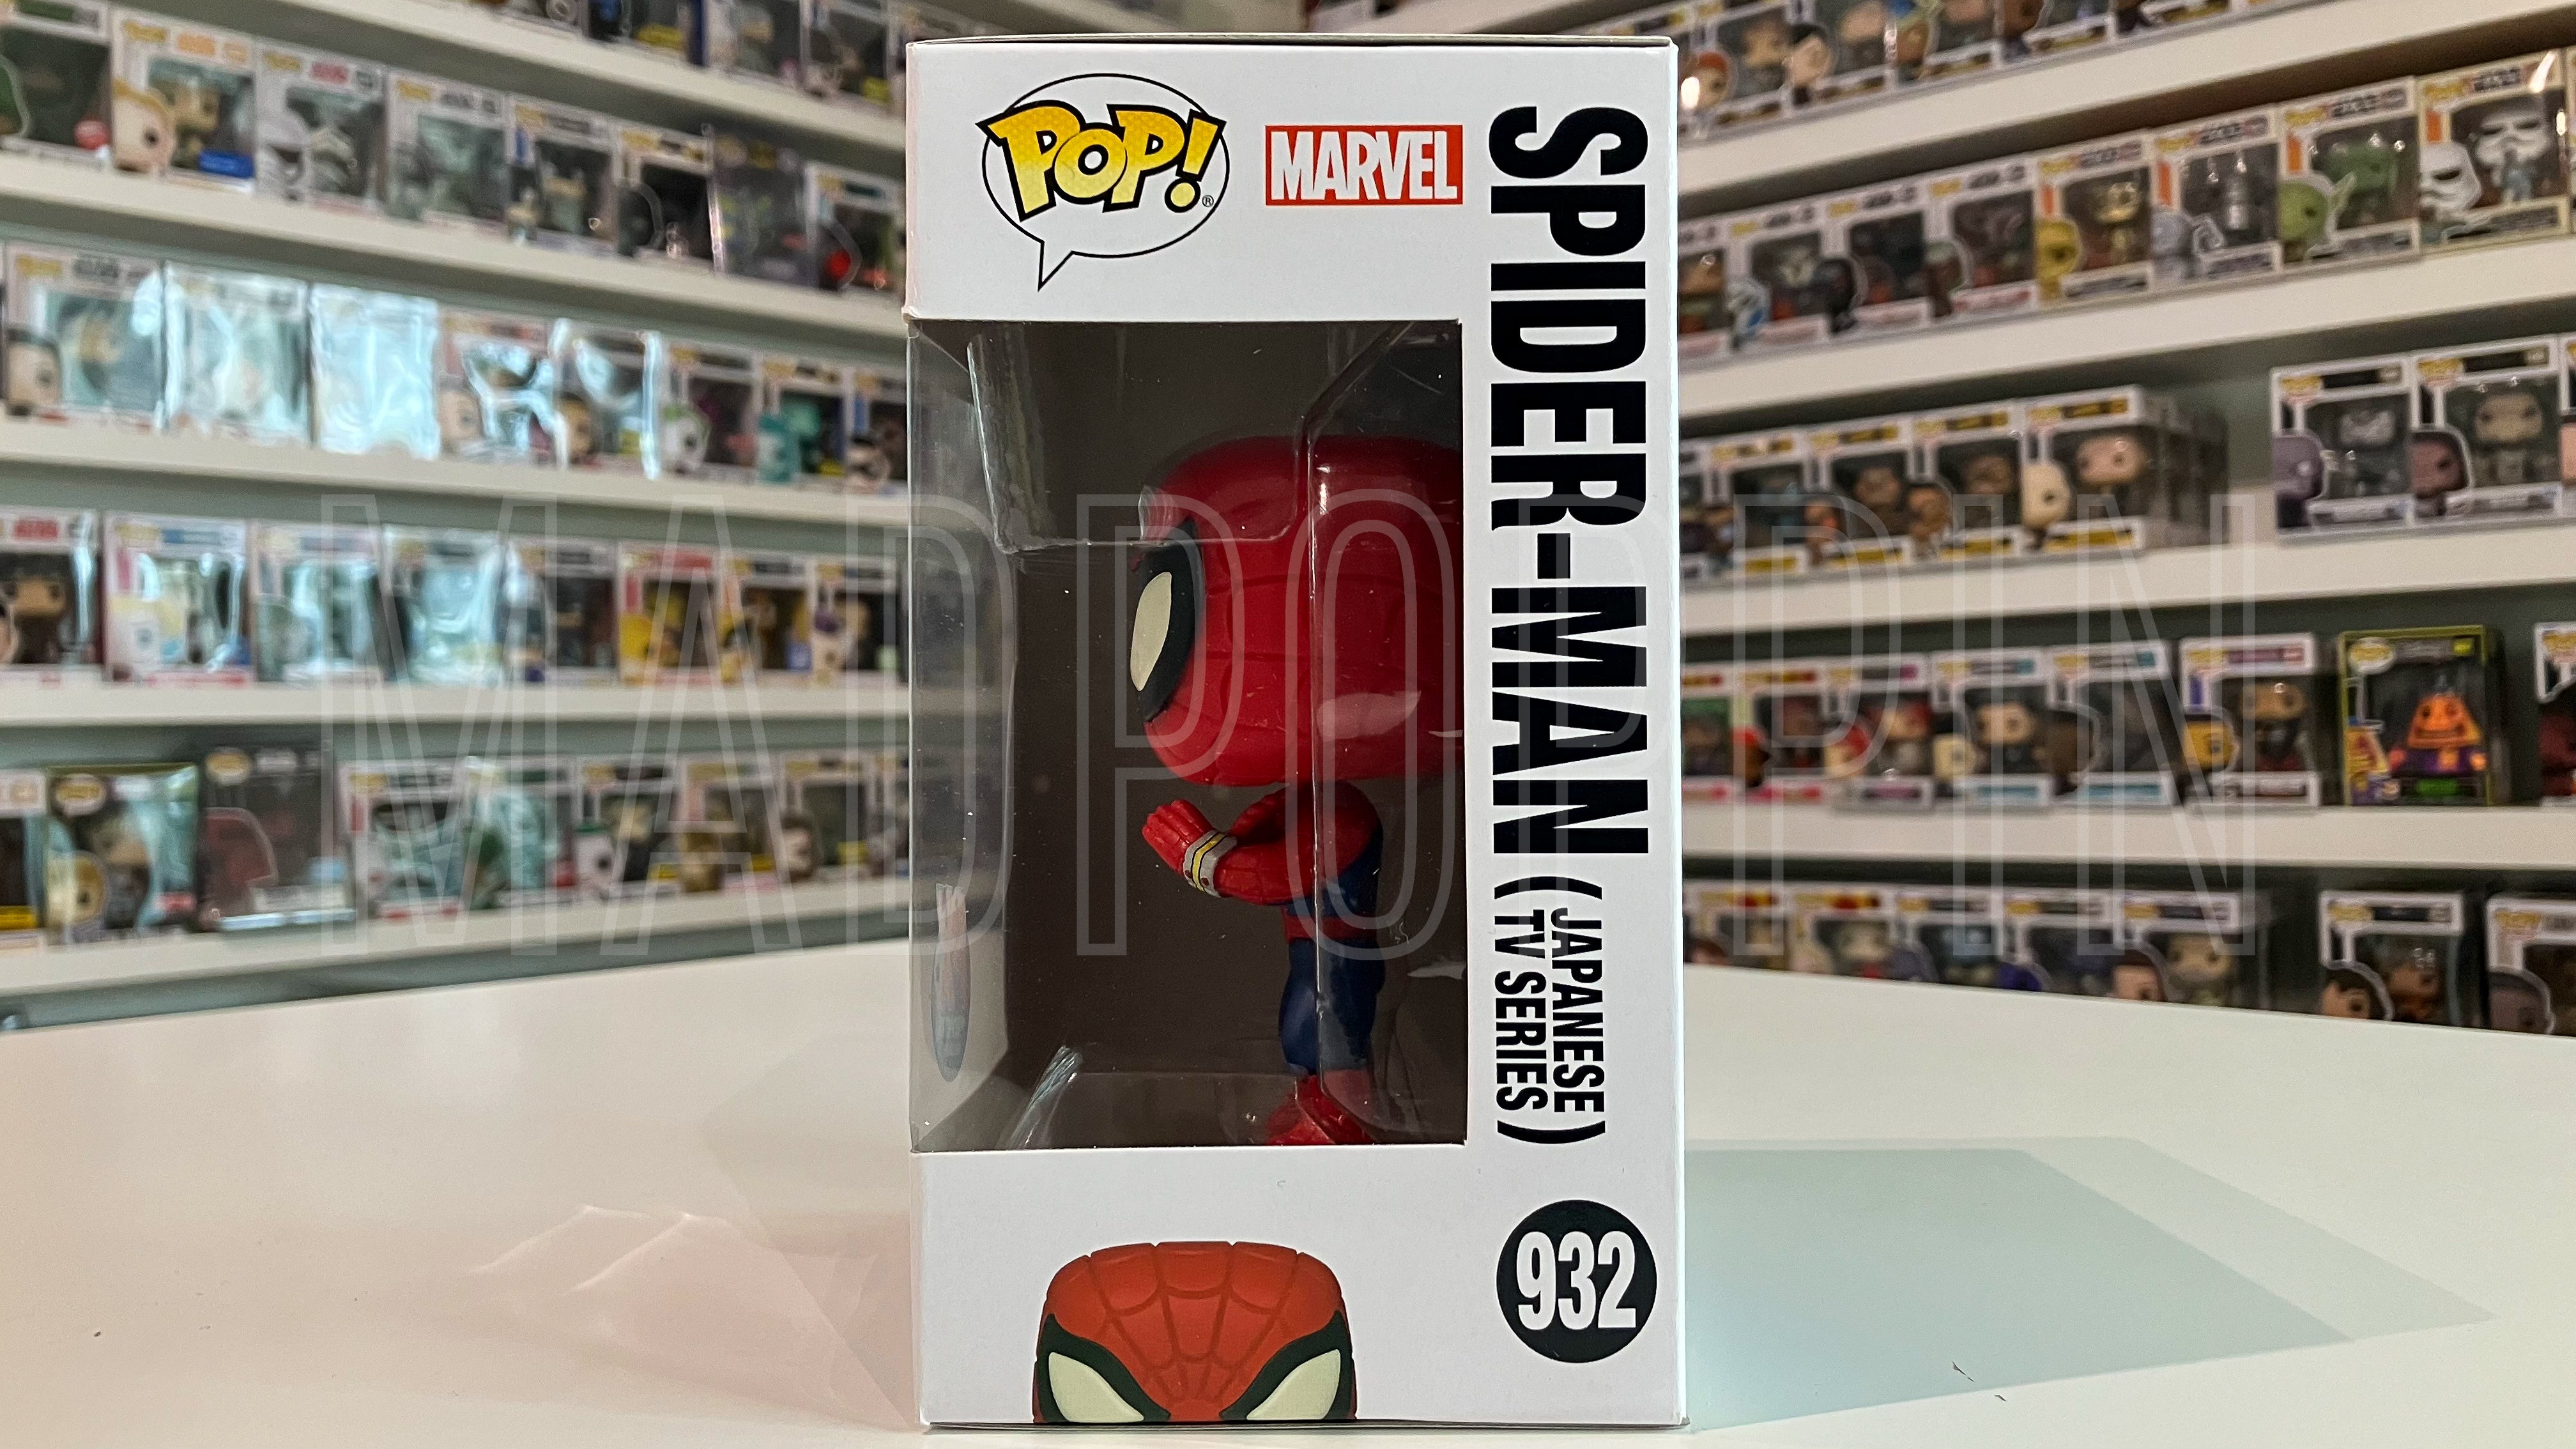 Funko Pop Marvel Spider-Man Japanese TV Series PX Previews Exclusive 932